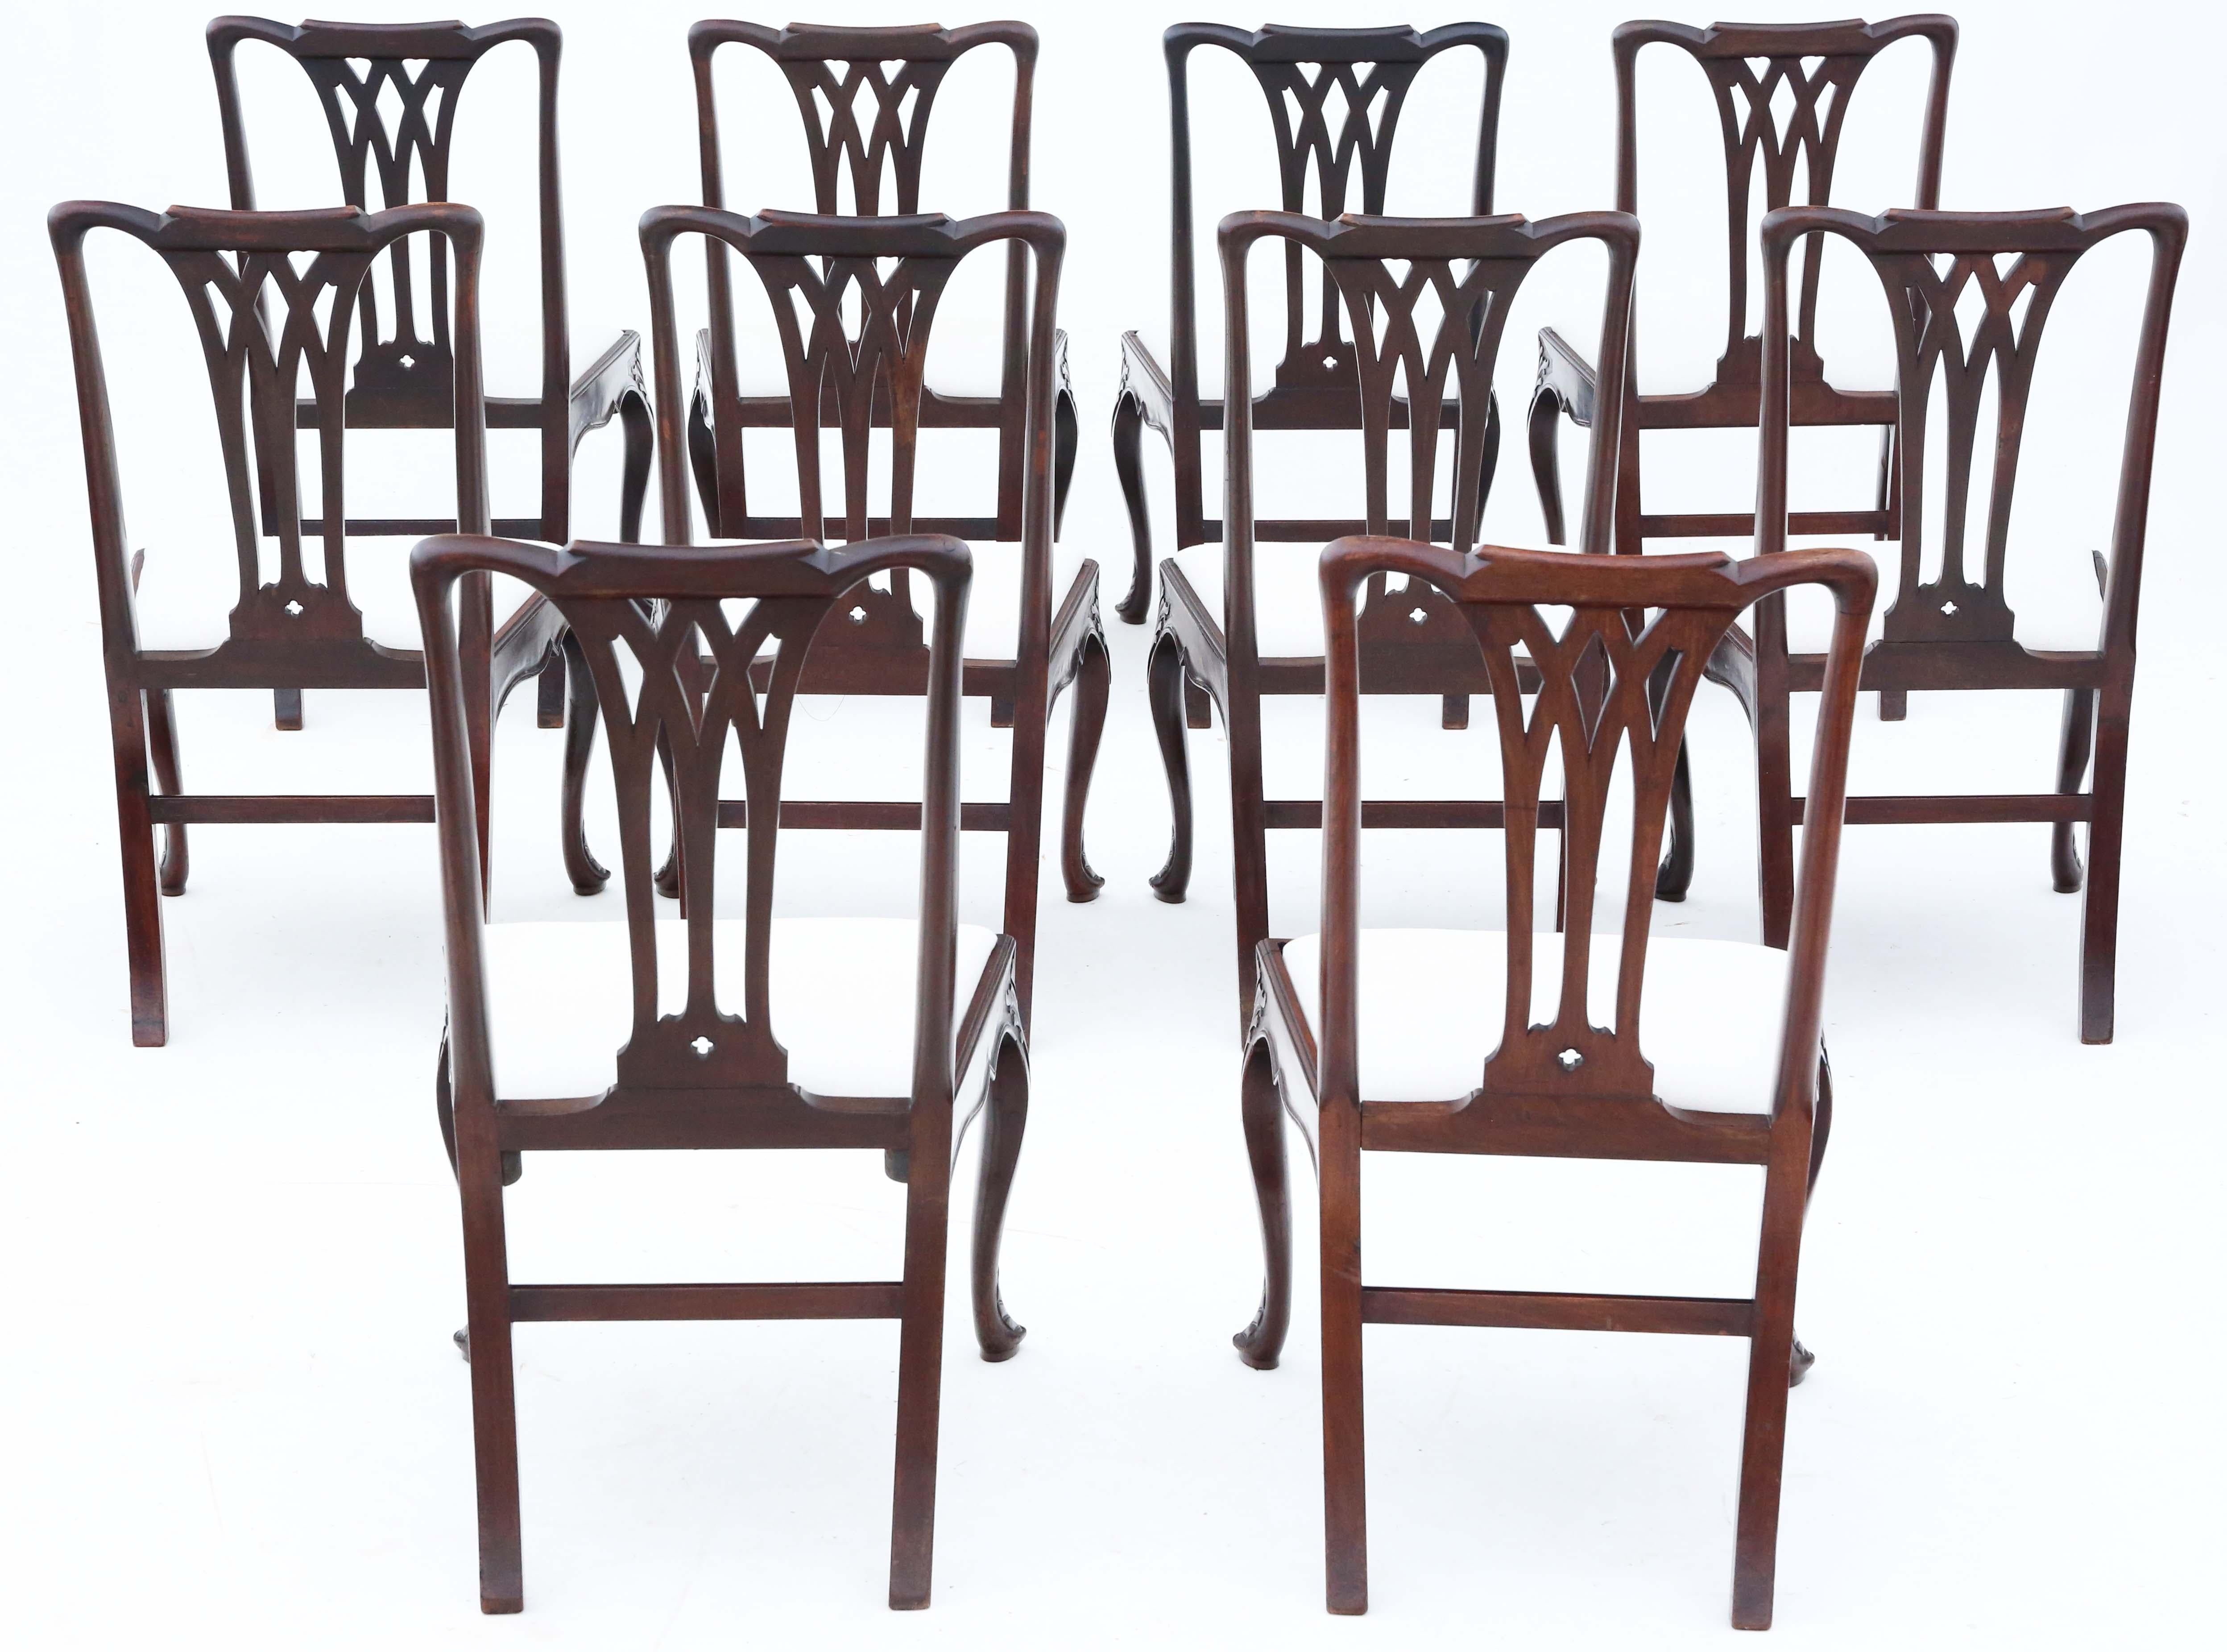 Experience the elegance of a rare find with this exquisite set of 10 18th Century Georgian carved mahogany dining chairs, possibly of Cuban origin. Each chair is a testament to fine craftsmanship, boasting intricate carving and elegant cabriole legs